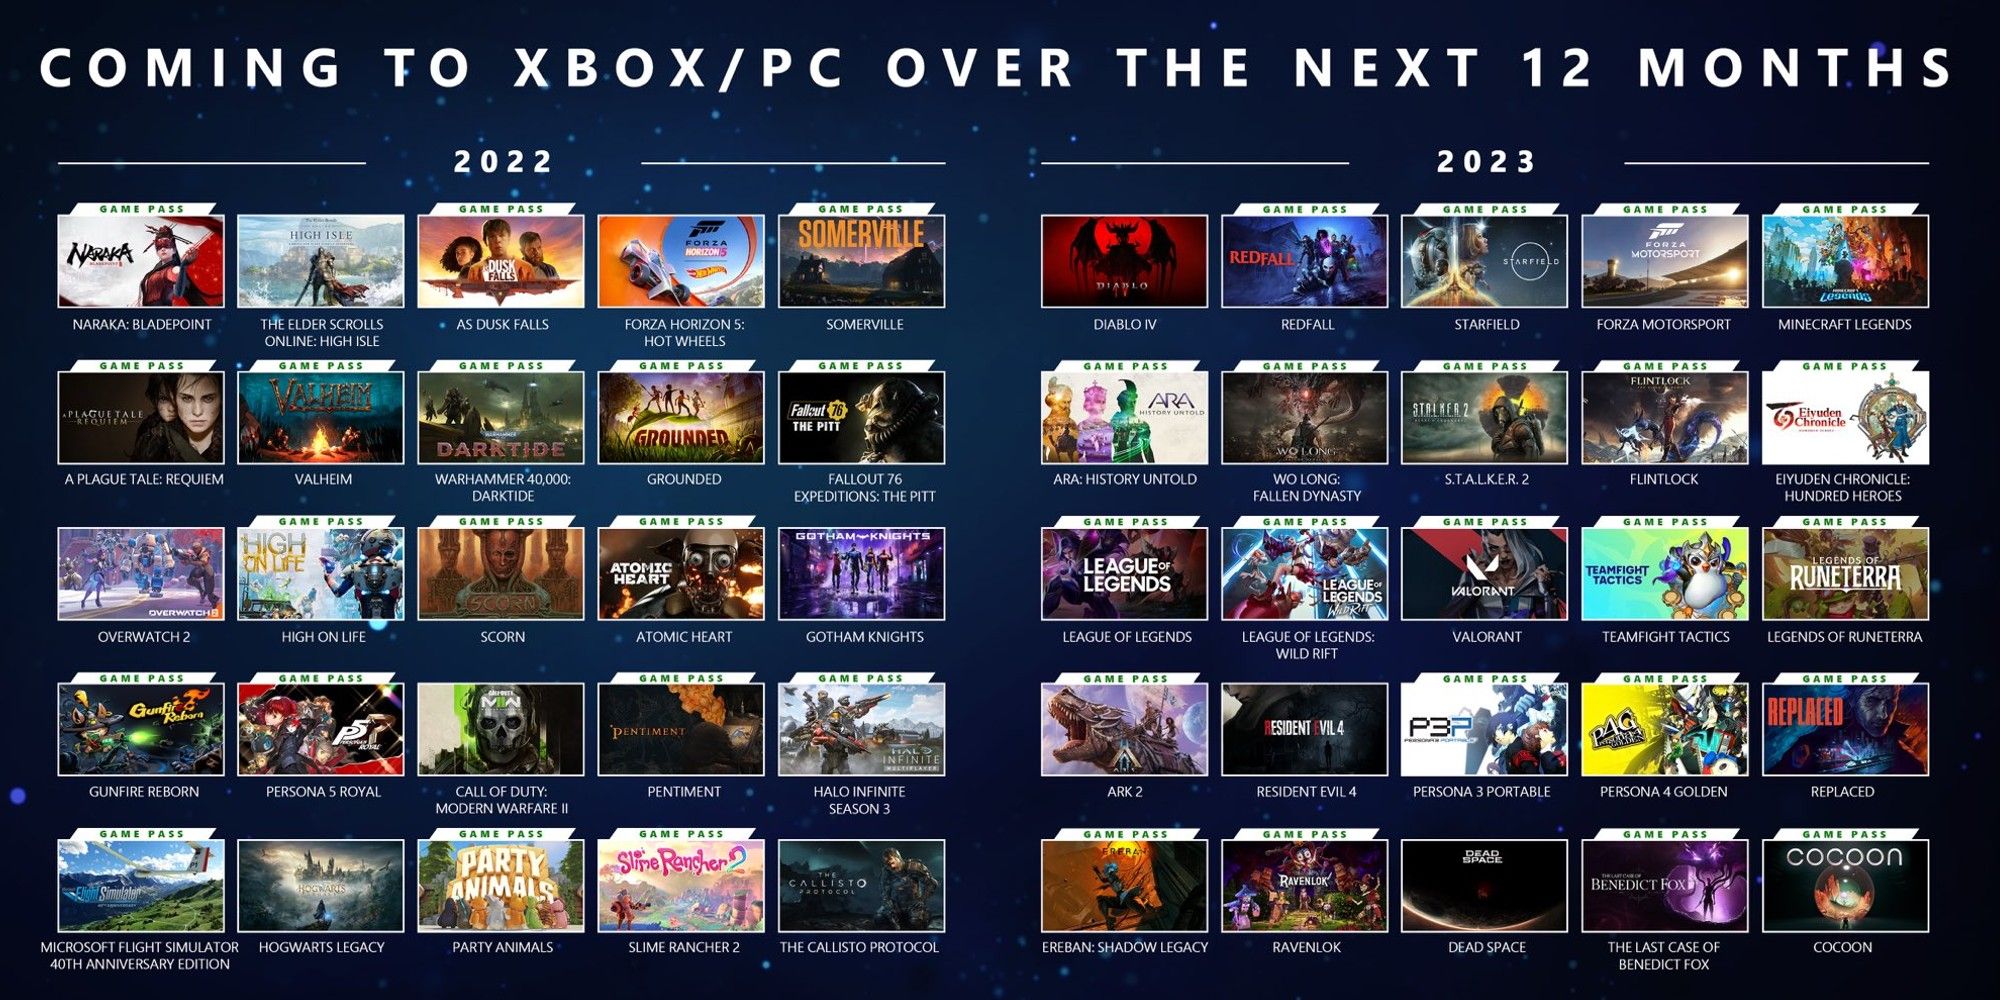 Xbox and PC Games Slate For 2022 and 2023